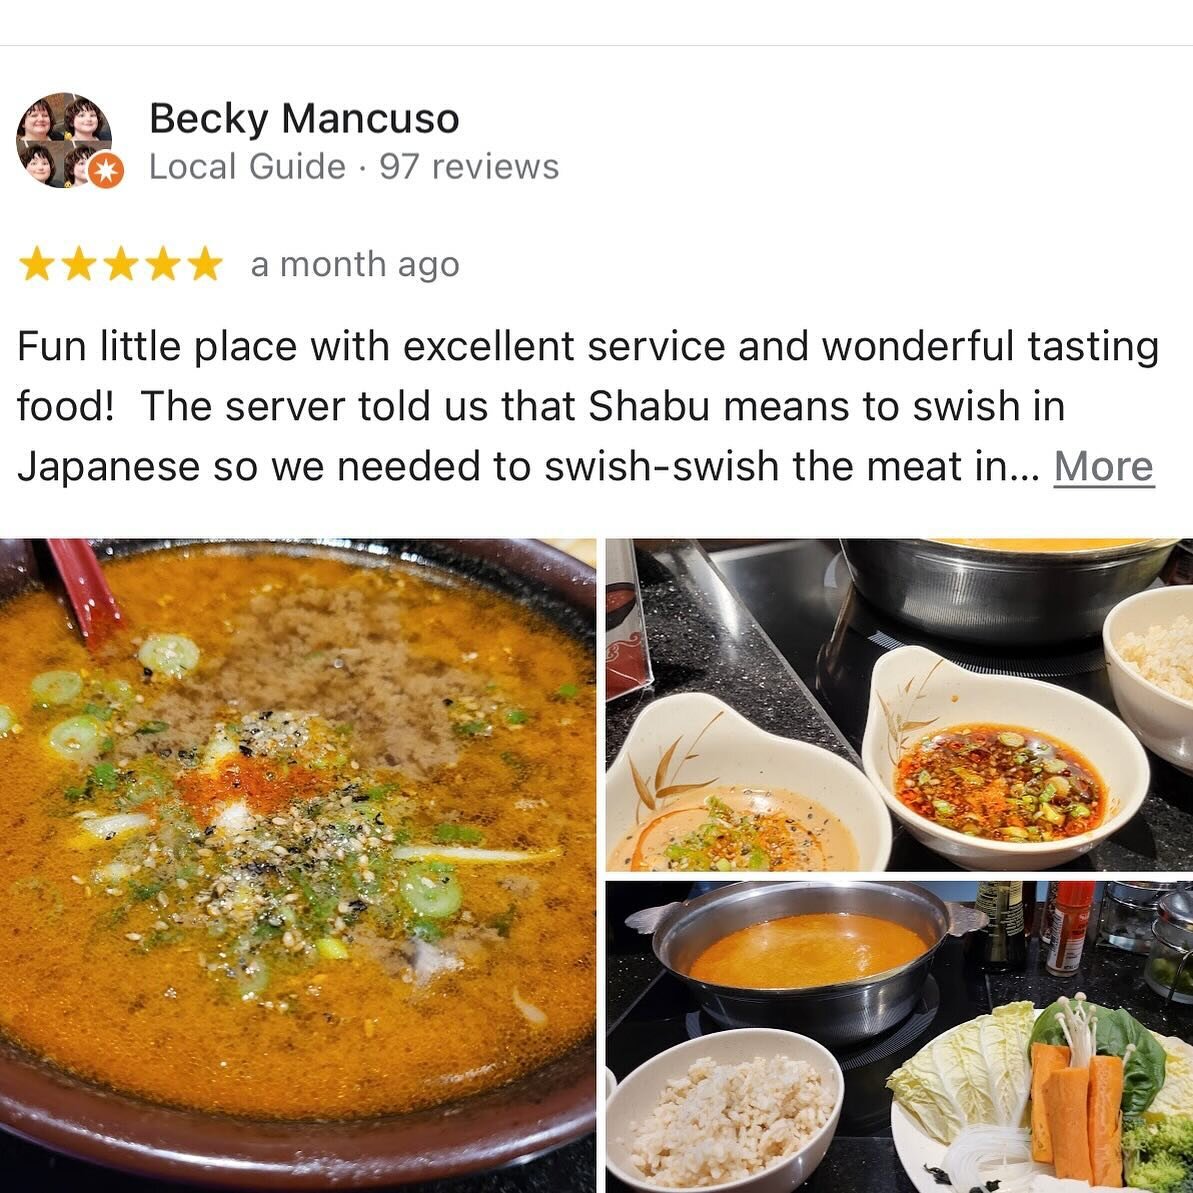 Big thanks to Becky Mancuso, a level 7 Google guide, for her glowing 5-star review of our restaurant! We&rsquo;re honored by your support. Inspired by Becky&rsquo;s review? We&rsquo;d love to hear your experiences too. Join us for some delightful sha